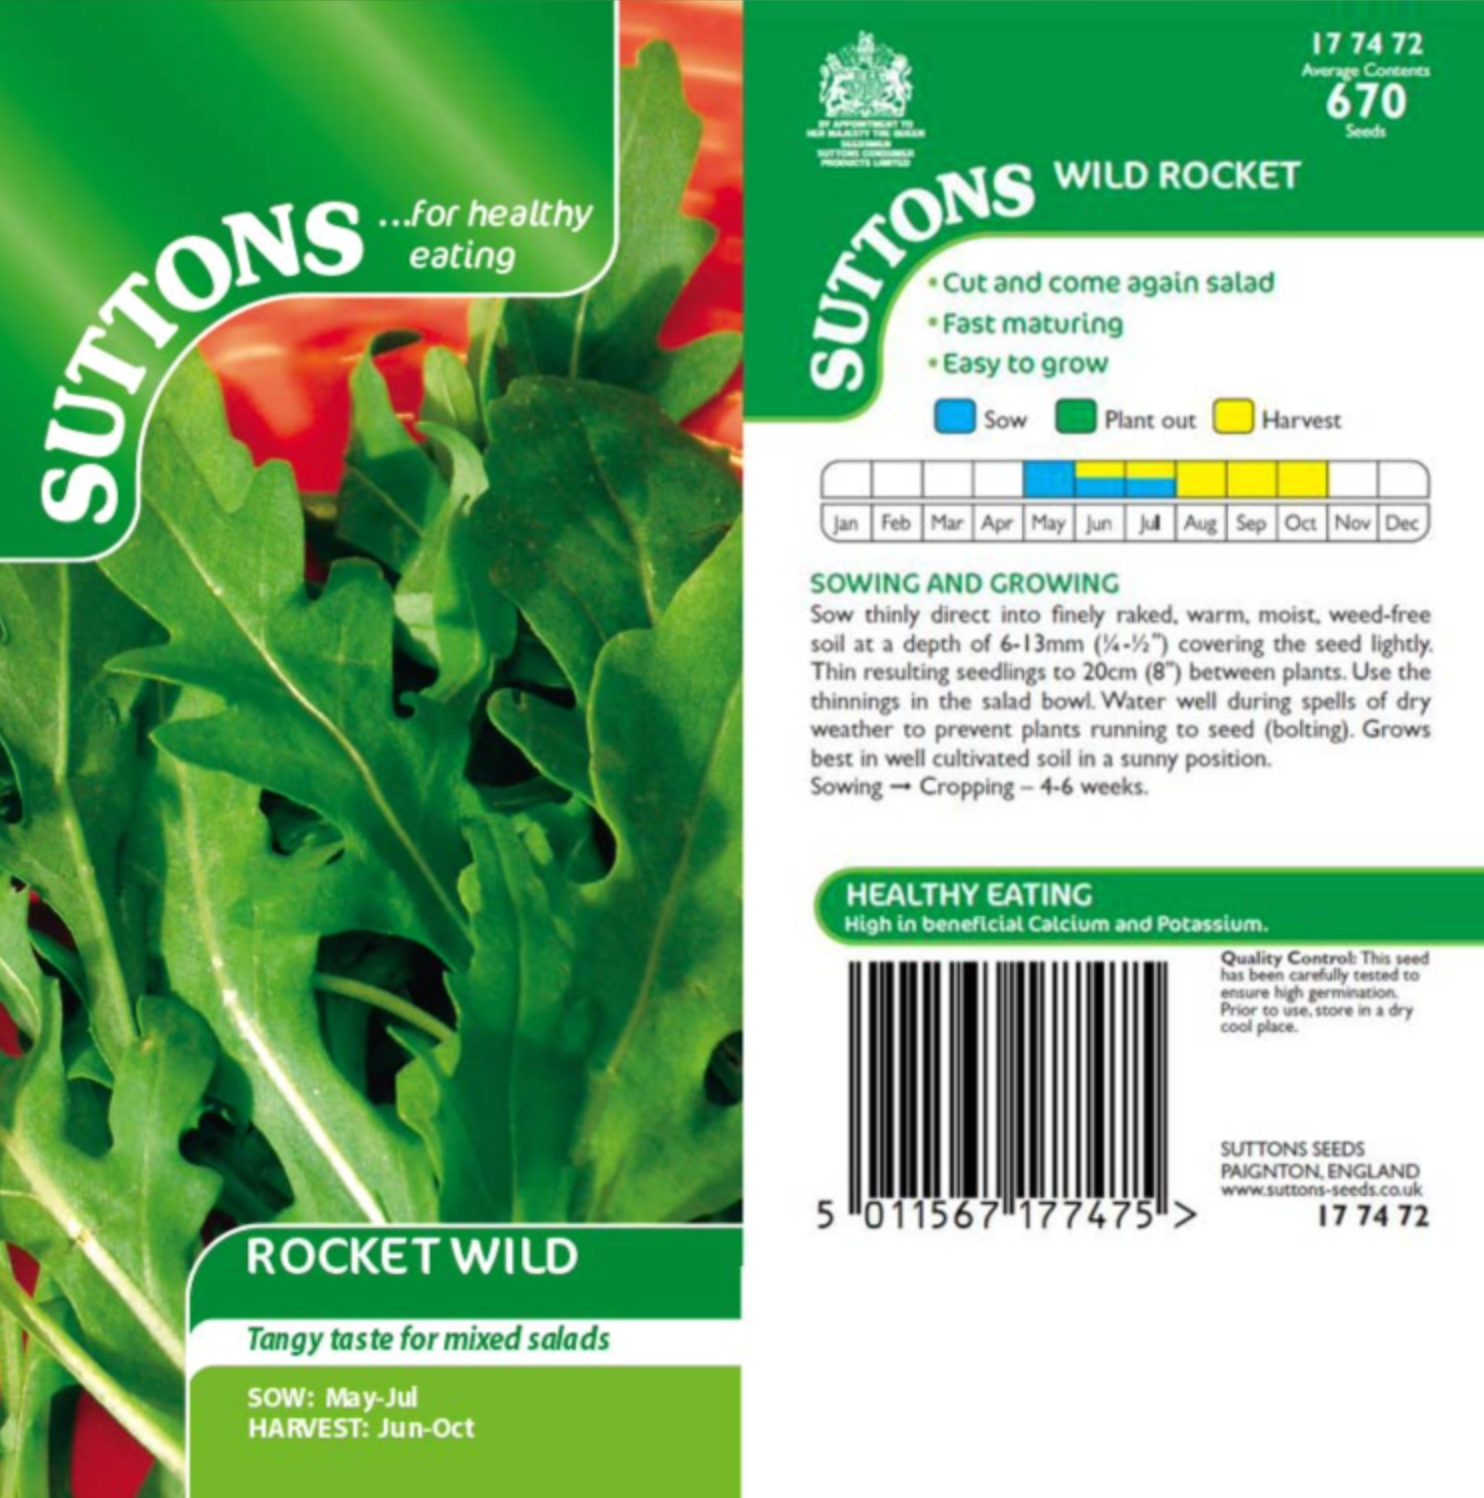 Suttons 'Salad Seeds' - Lettuce, Tomatoes, Cress, Peppers, Cucumber etc